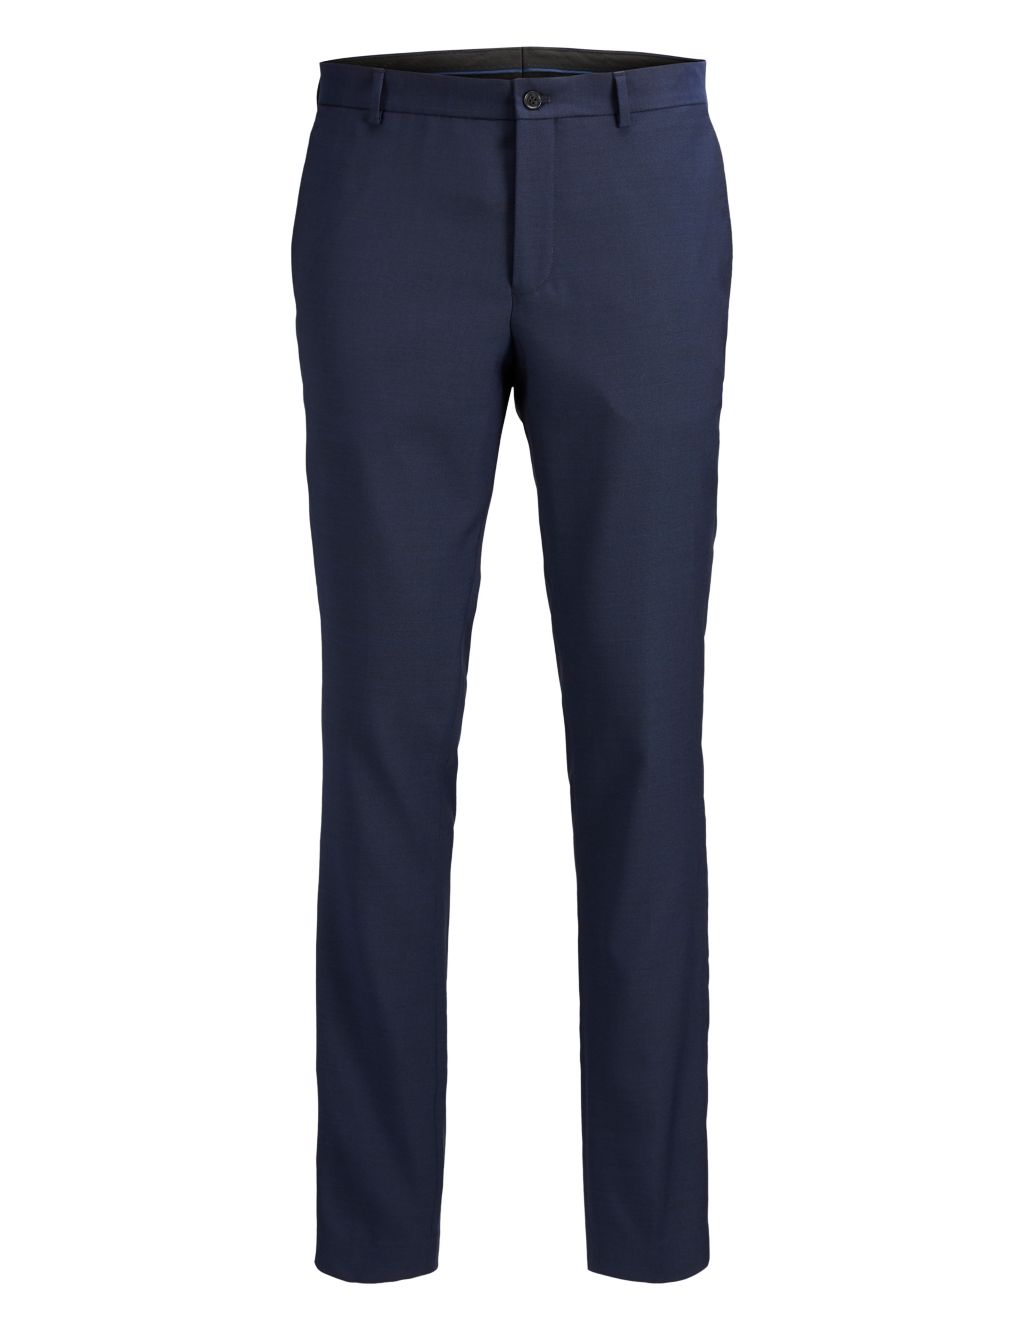 Tailored Fit Trousers image 2